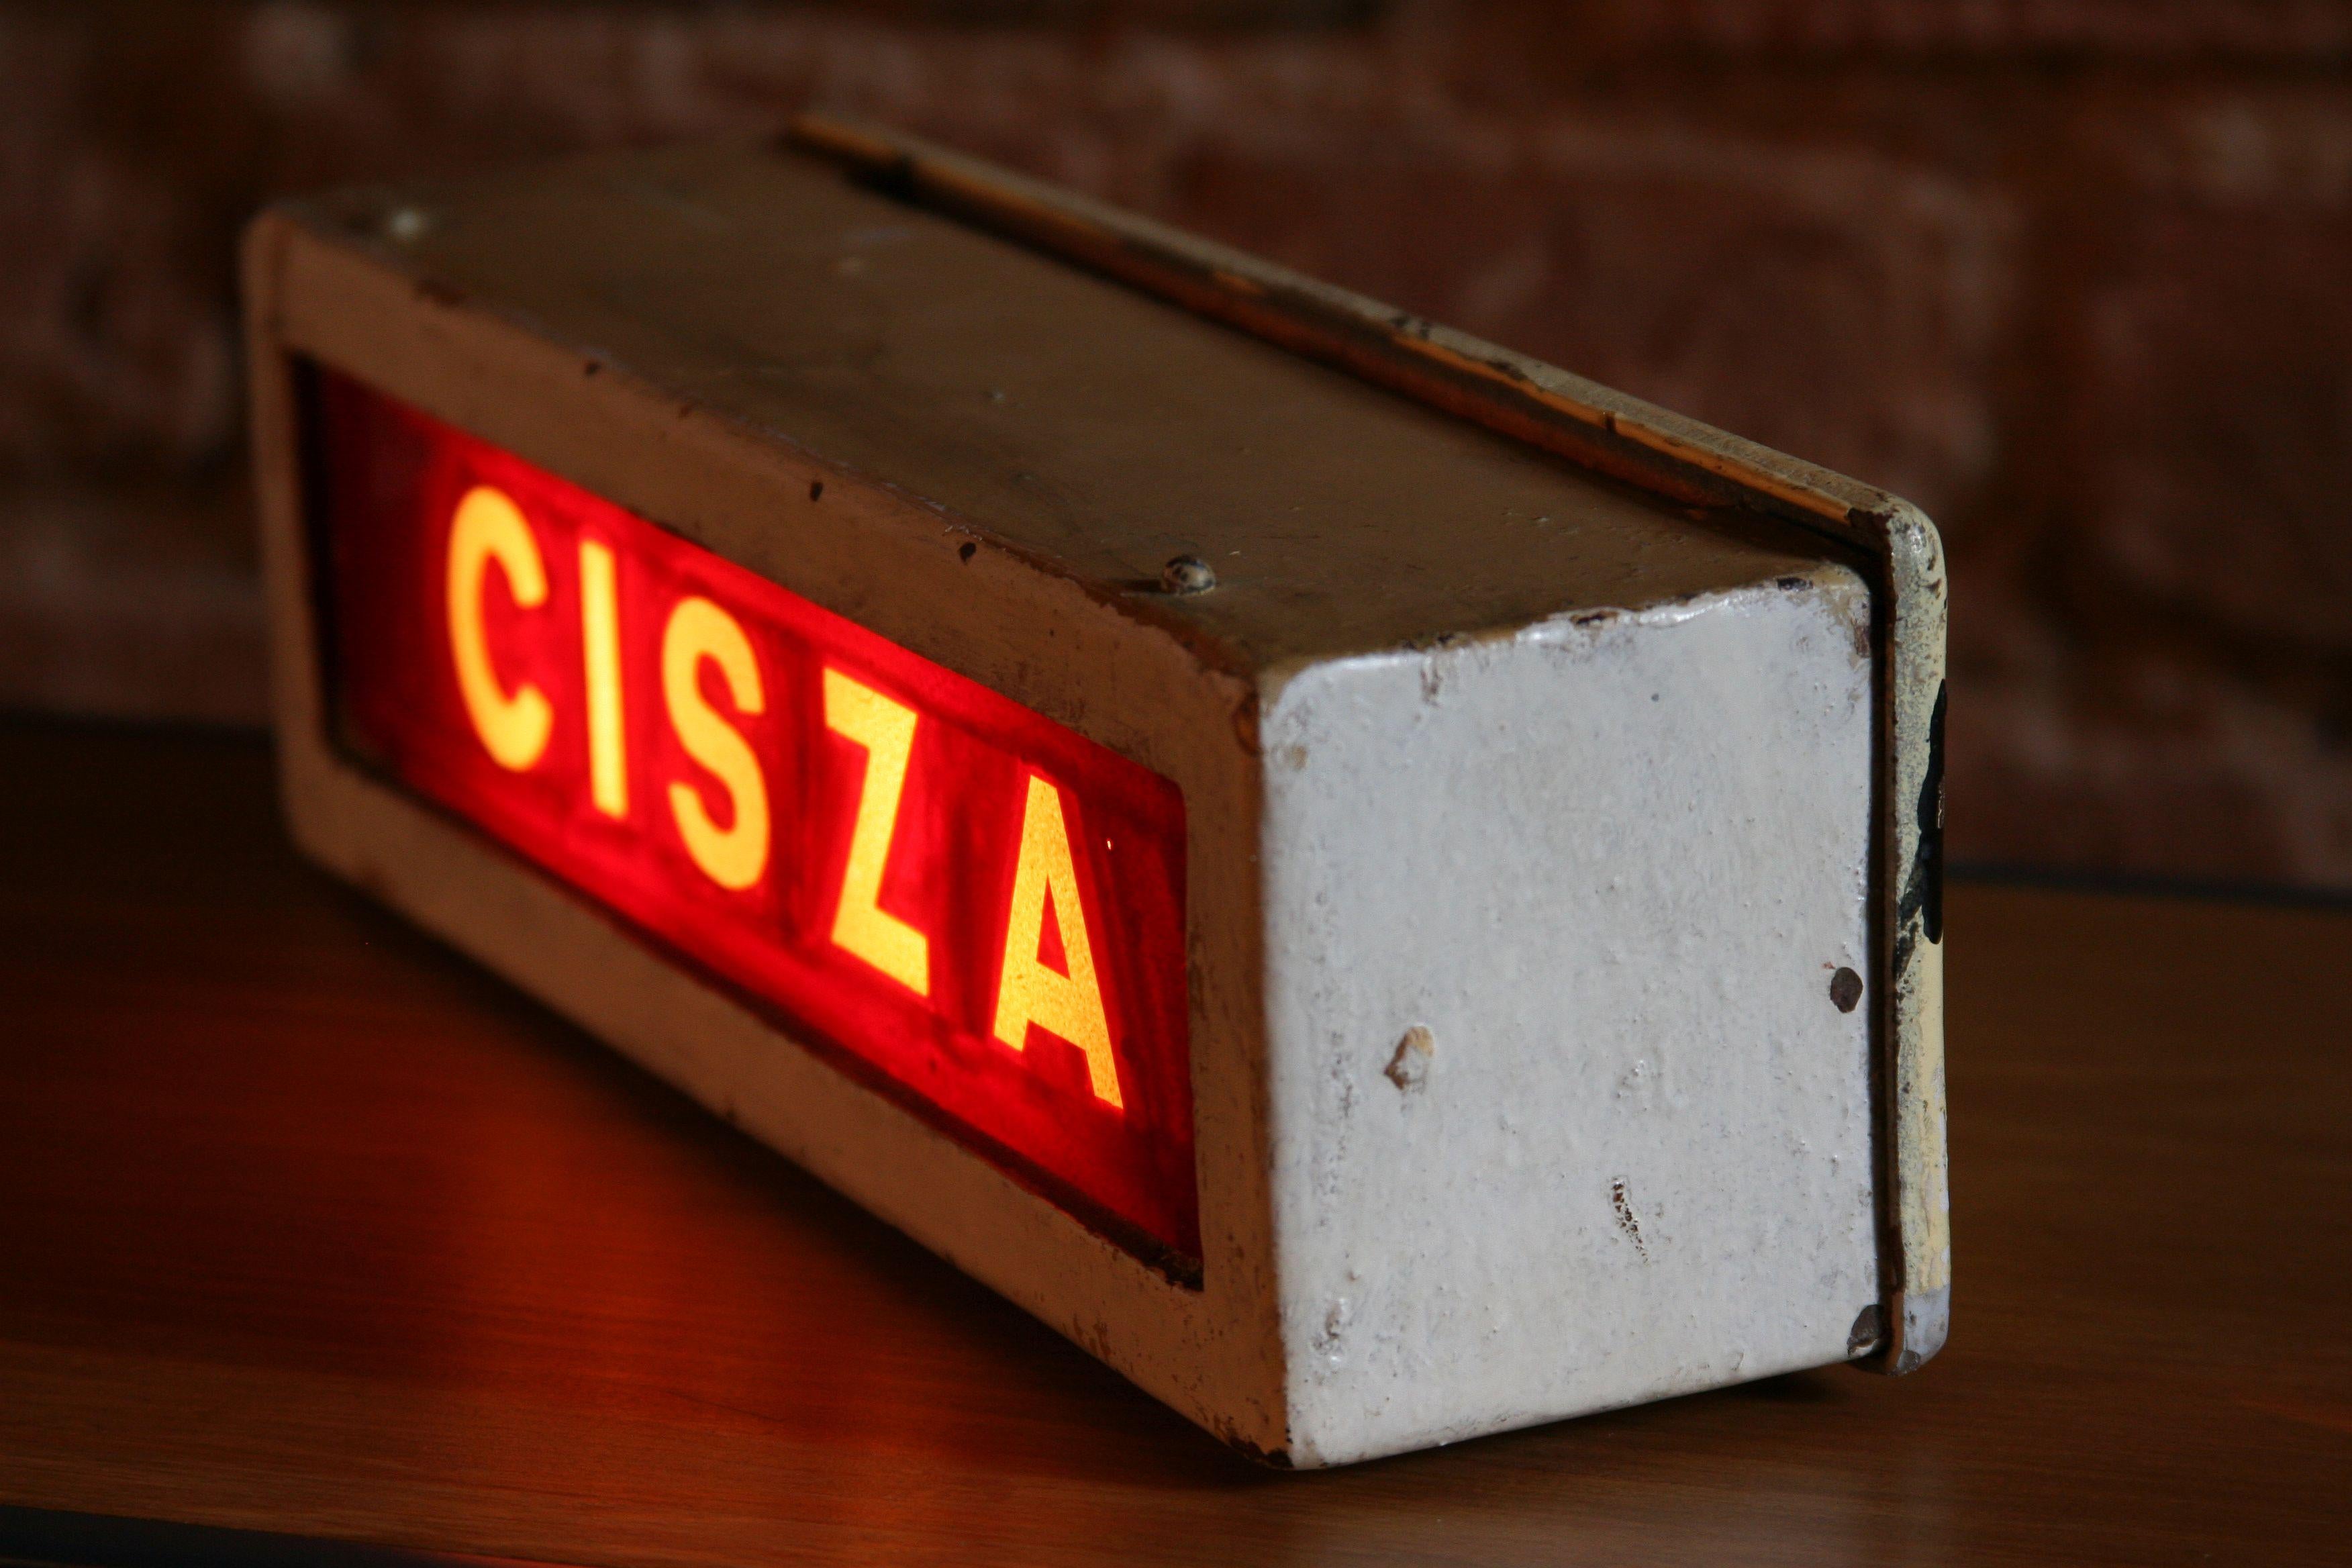 1950s Illuminated Theater Sign “Cisza”, Meaning “Silence” In Good Condition In Warsaw, PL